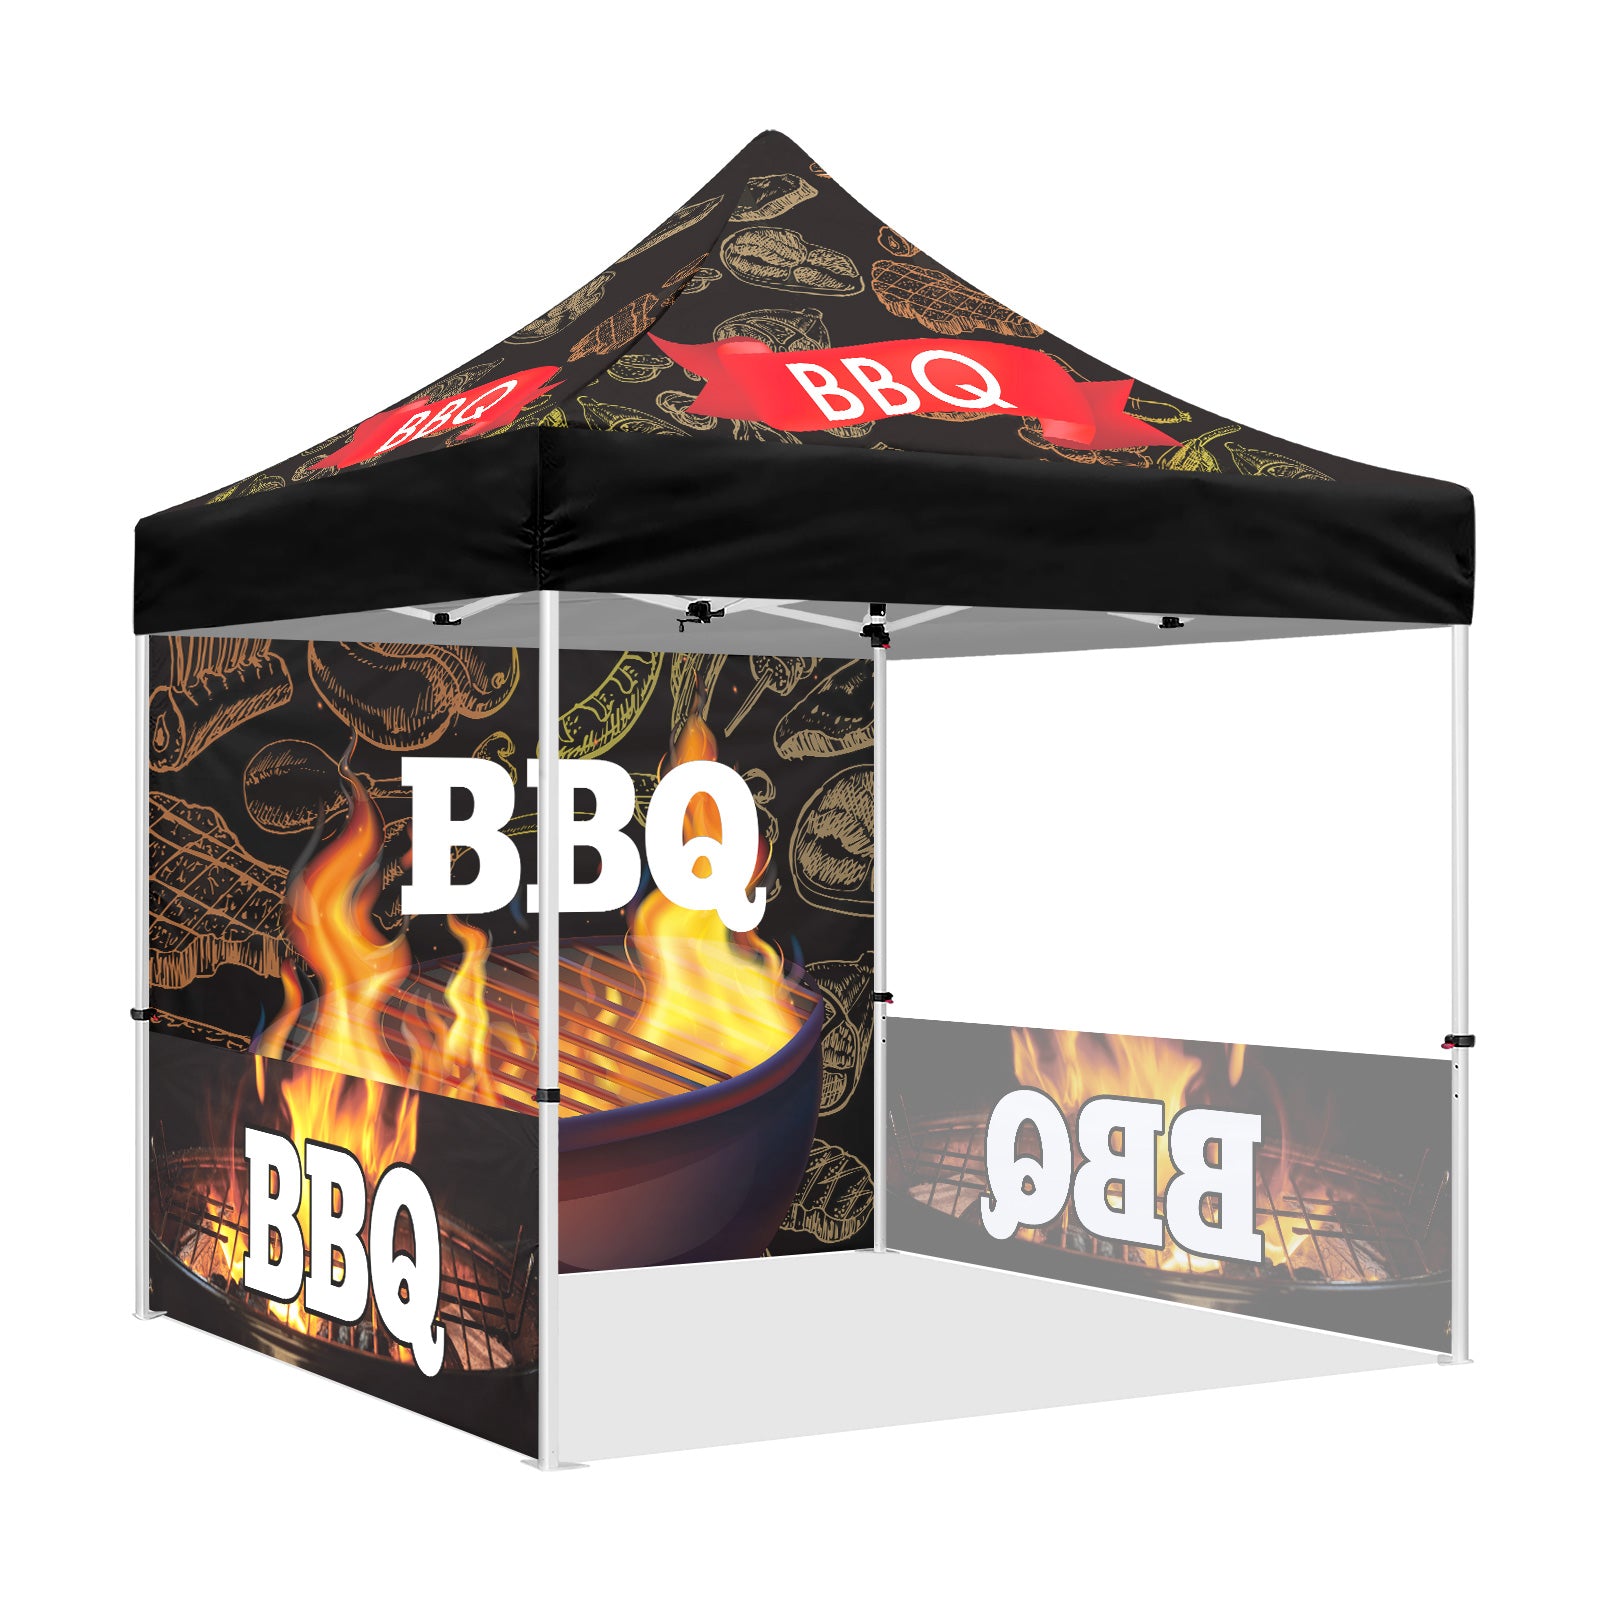 ABLEM8CANOPY 10x10 Themed Pop Up Canopy Tent for BBQ Food Vendors ...